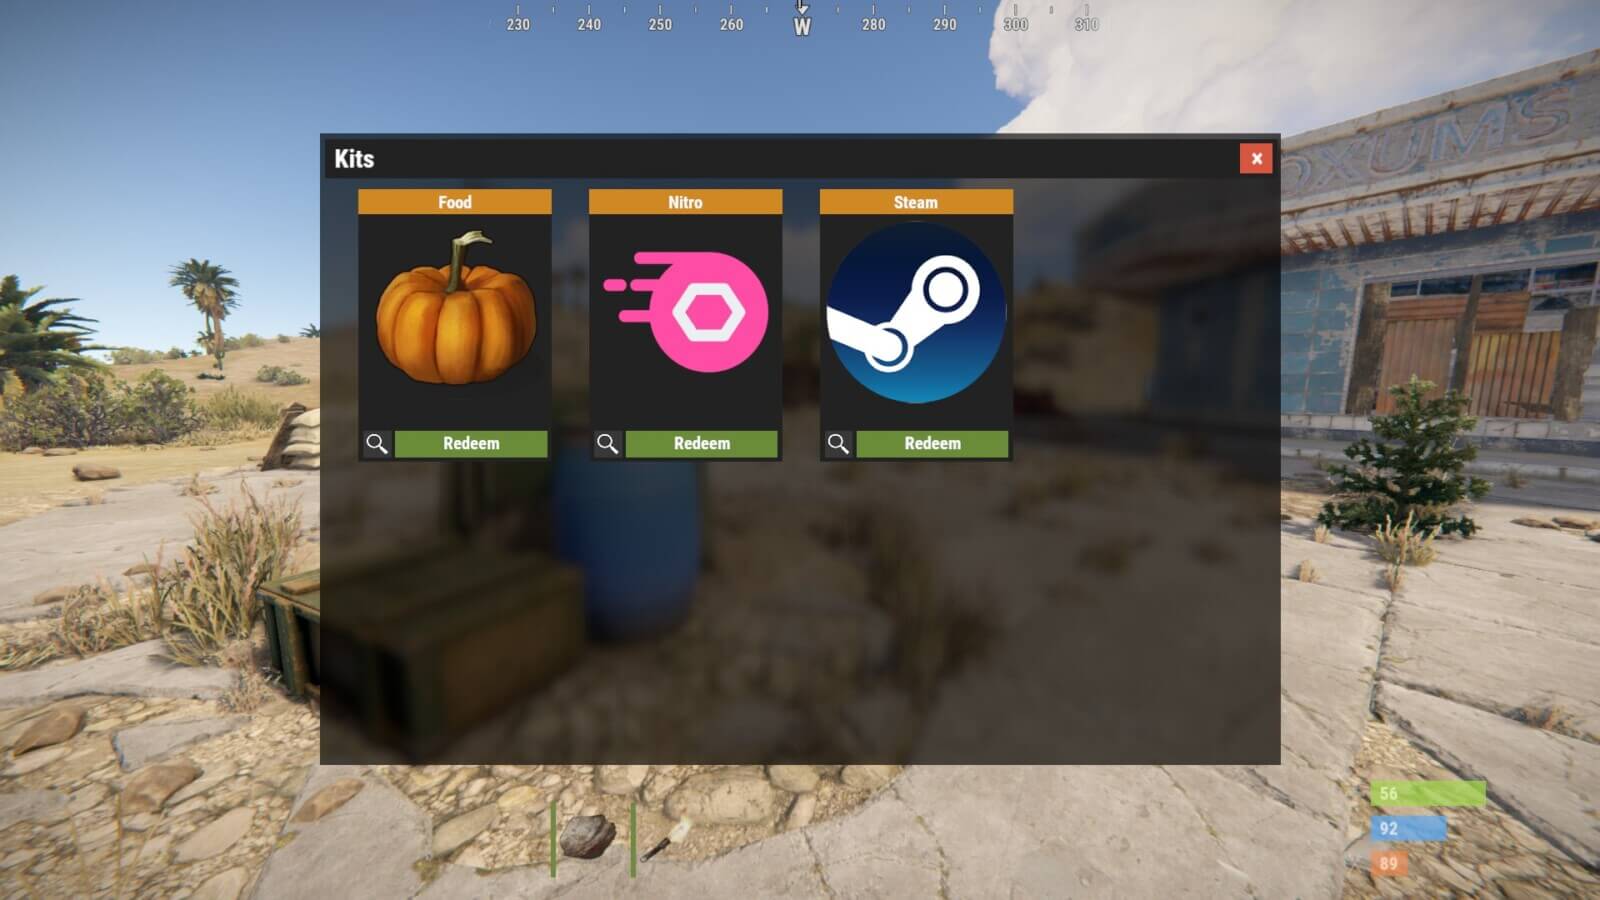 In-game Kits user interface from the Chaos Gaming server organization.